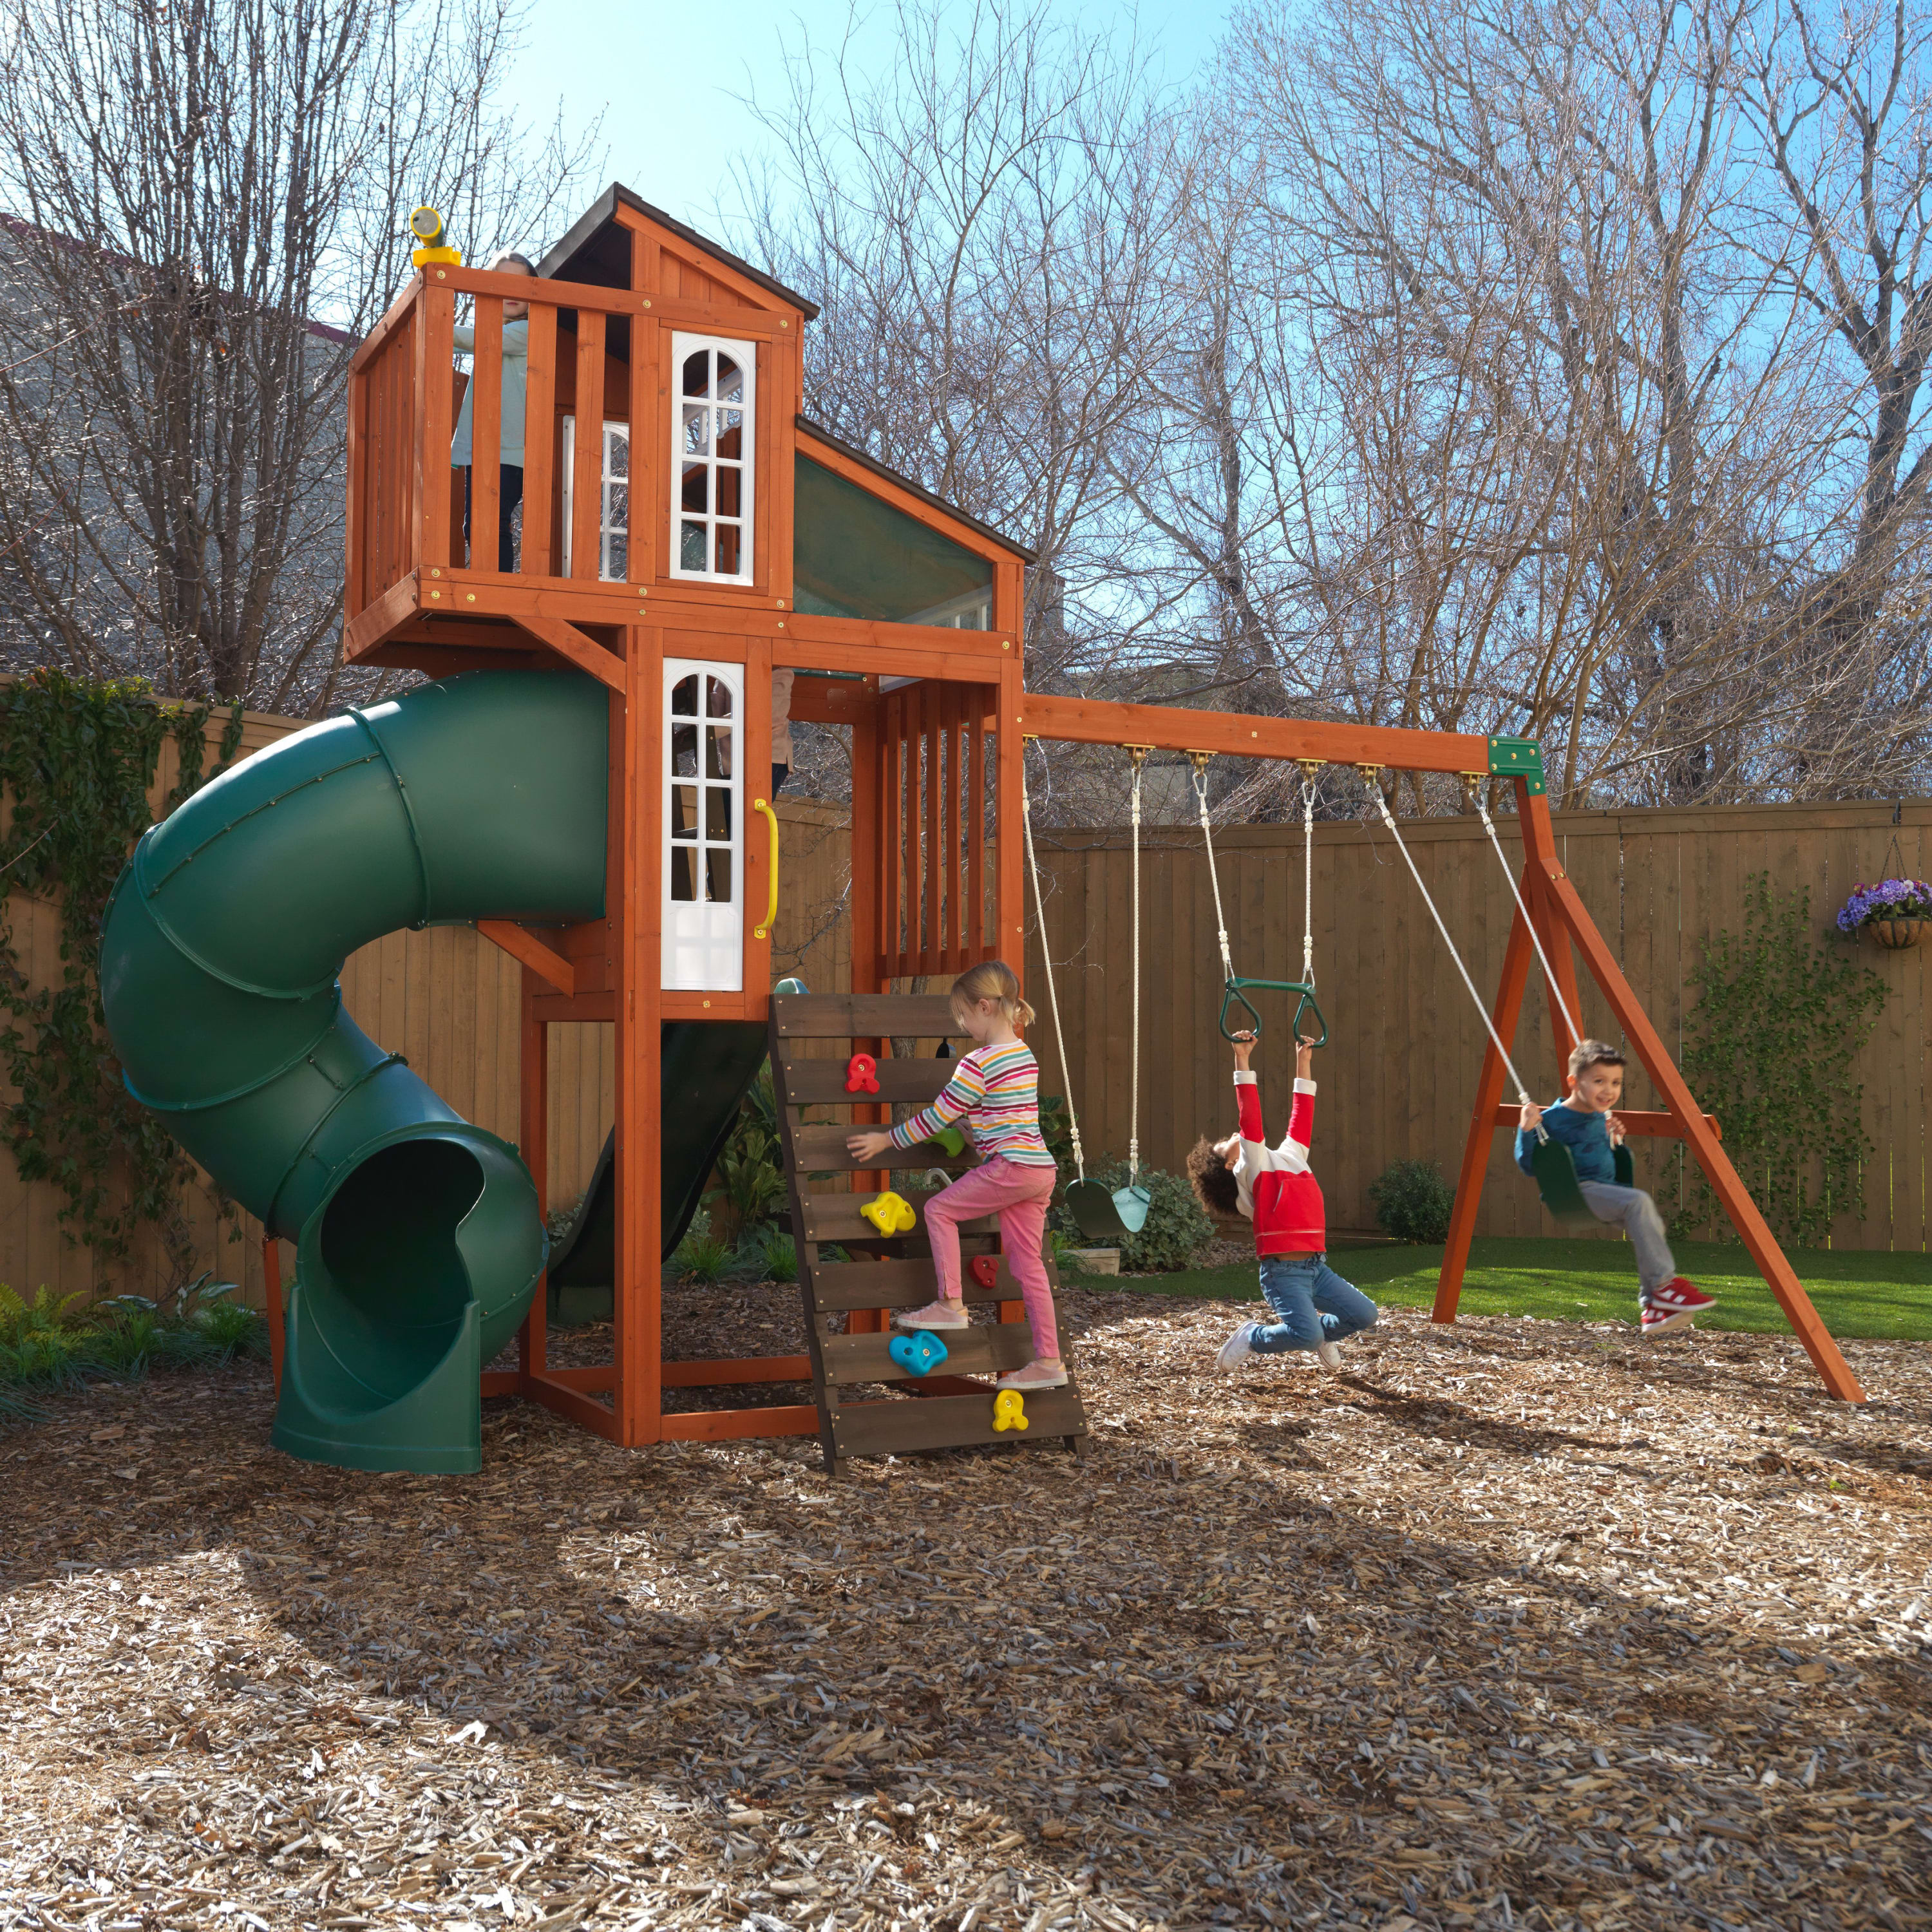 KidKraft Austin Wooden Outdoor Swing Set with Slides, Swings, Kitchen and Rock Wall - image 7 of 27